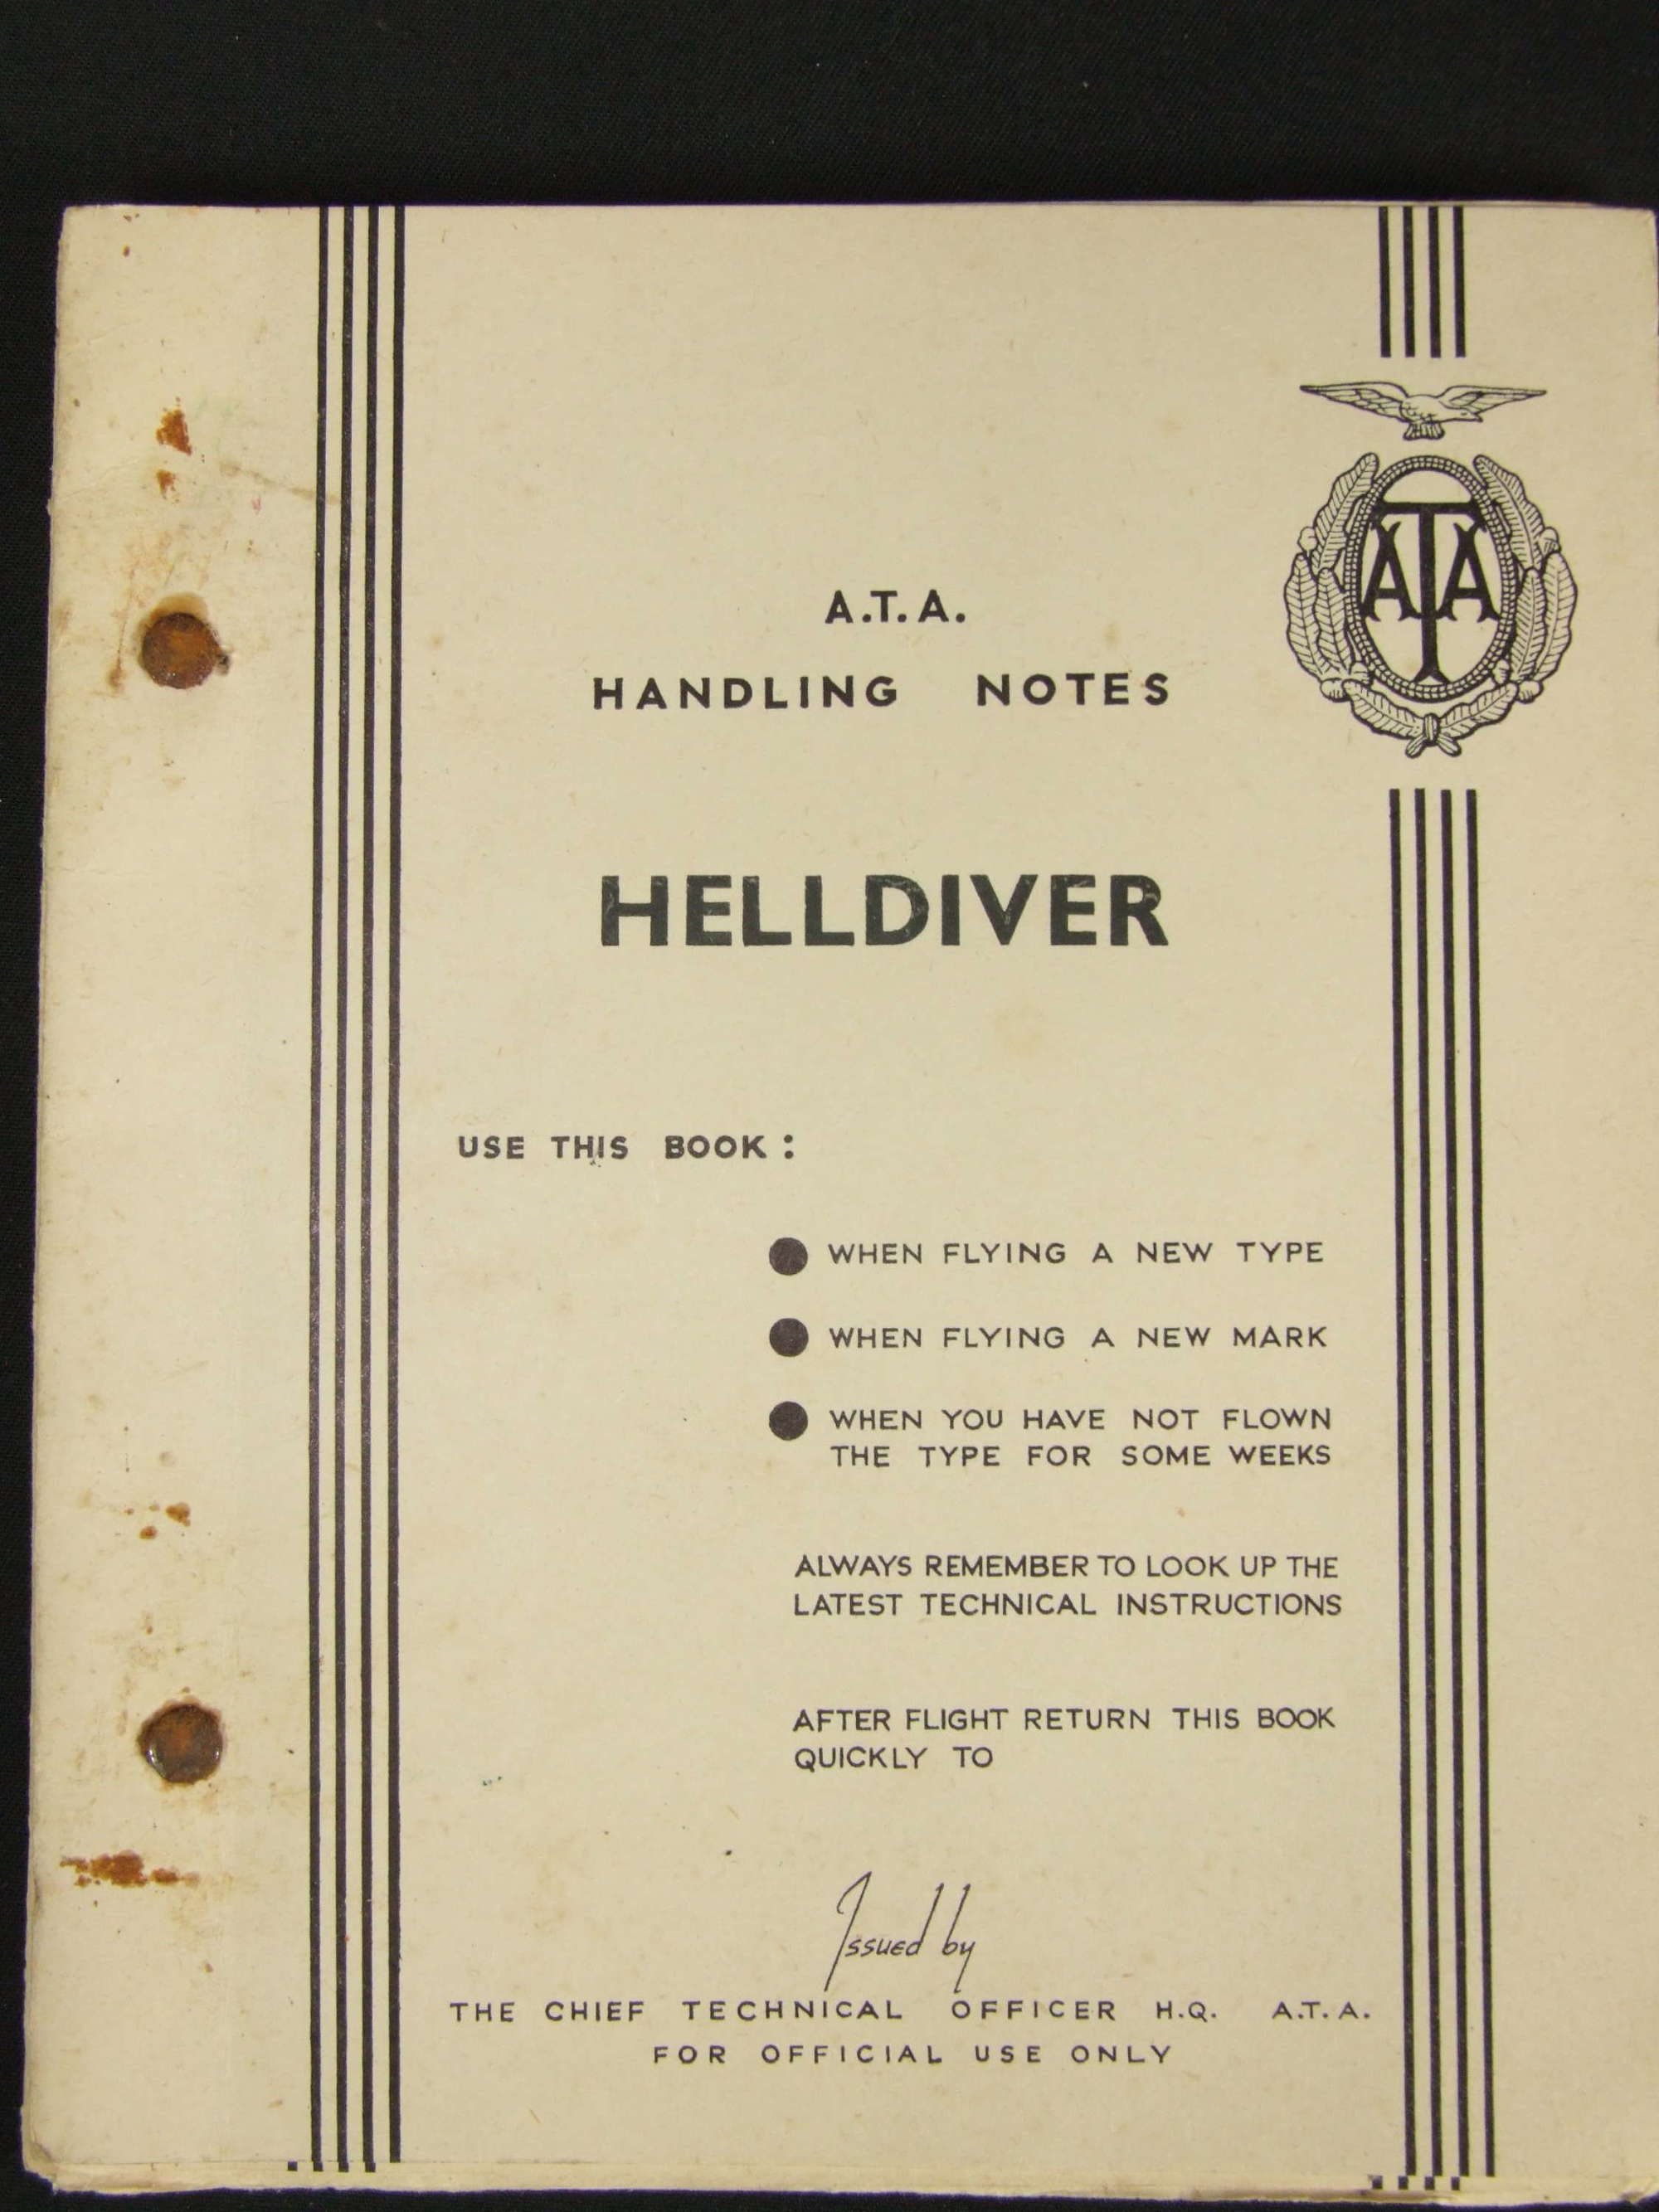 1944 Air Transport Auxiliary Handling Notes - Helldiver